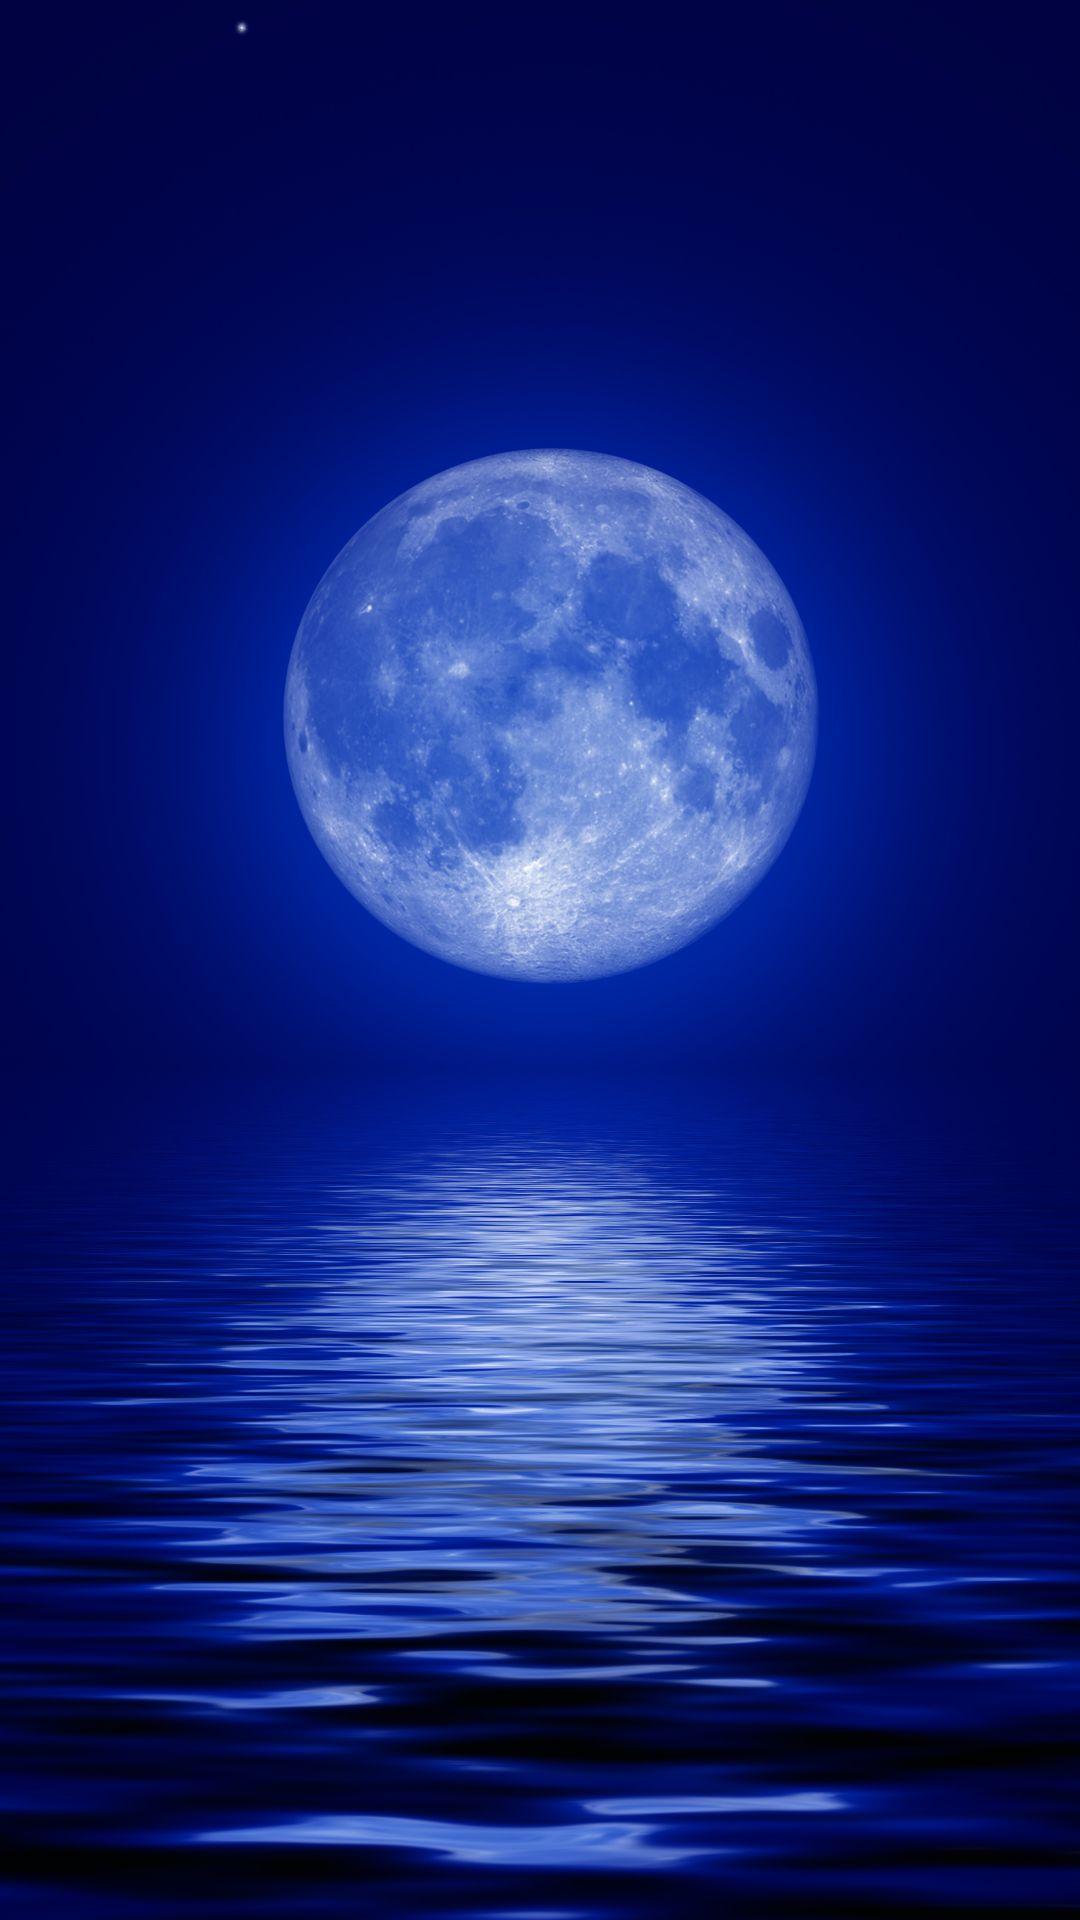 Blue Moon Wallpapers For Mobile - Wallpaper Cave